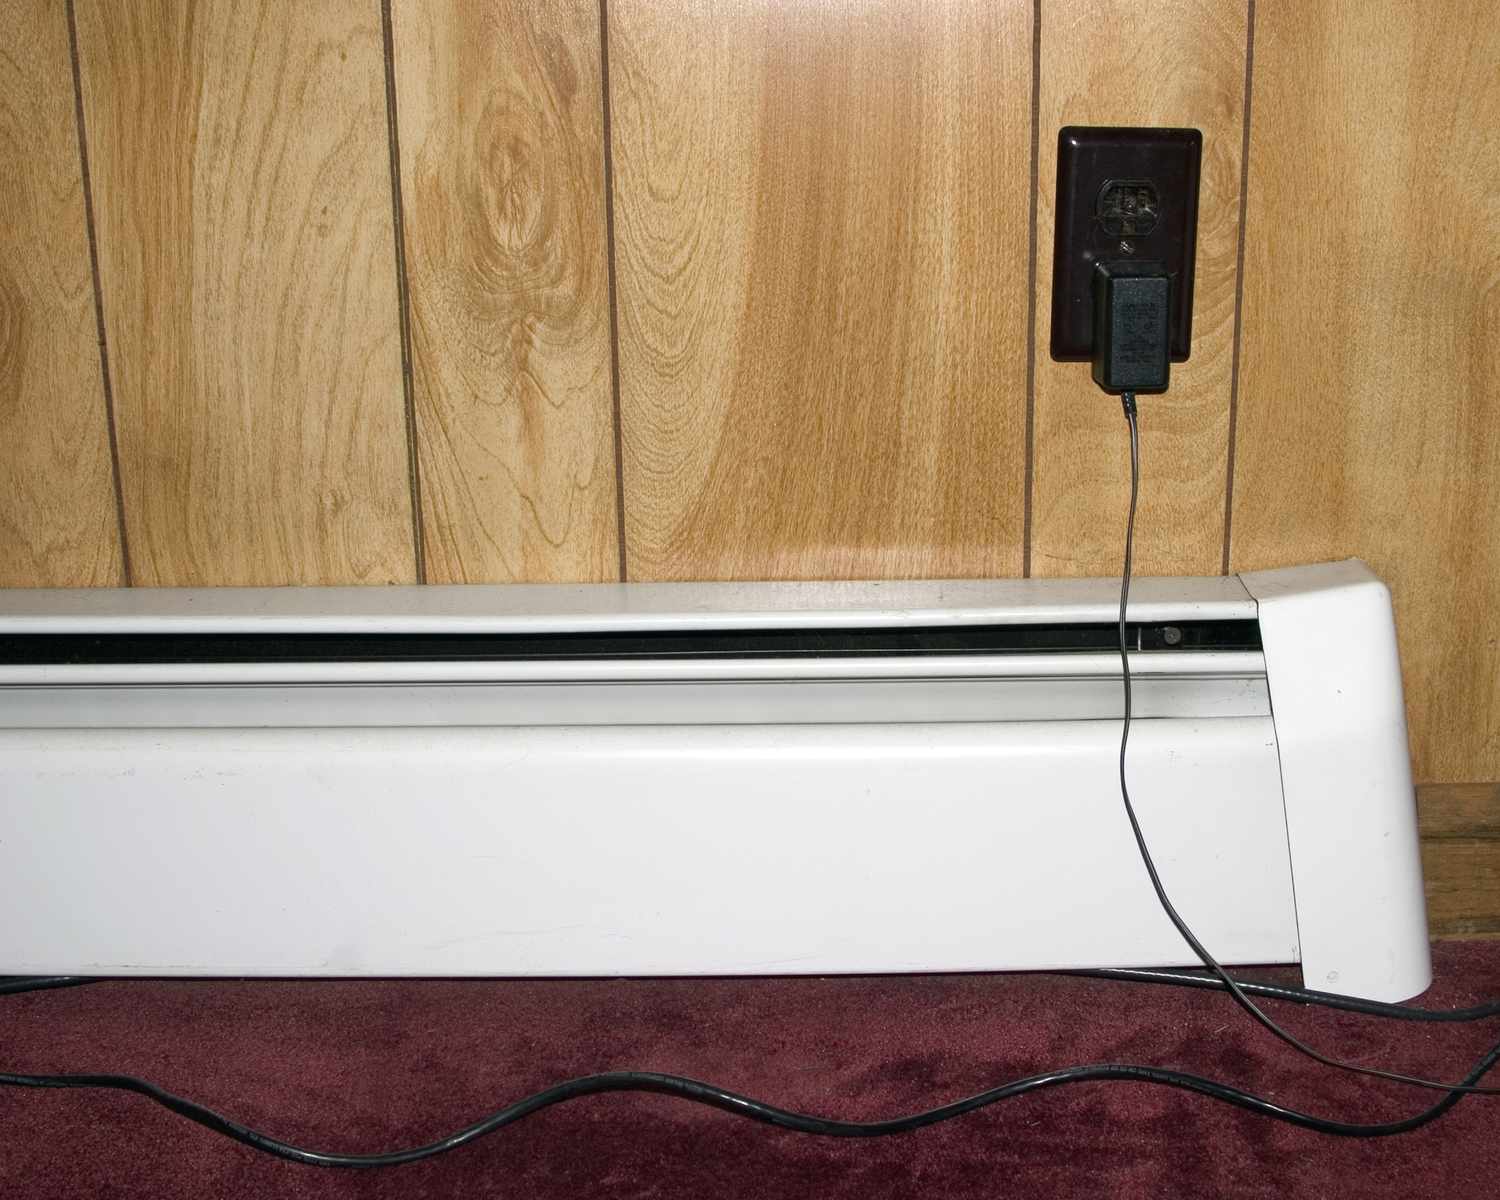 Close-up of a baseboard heater